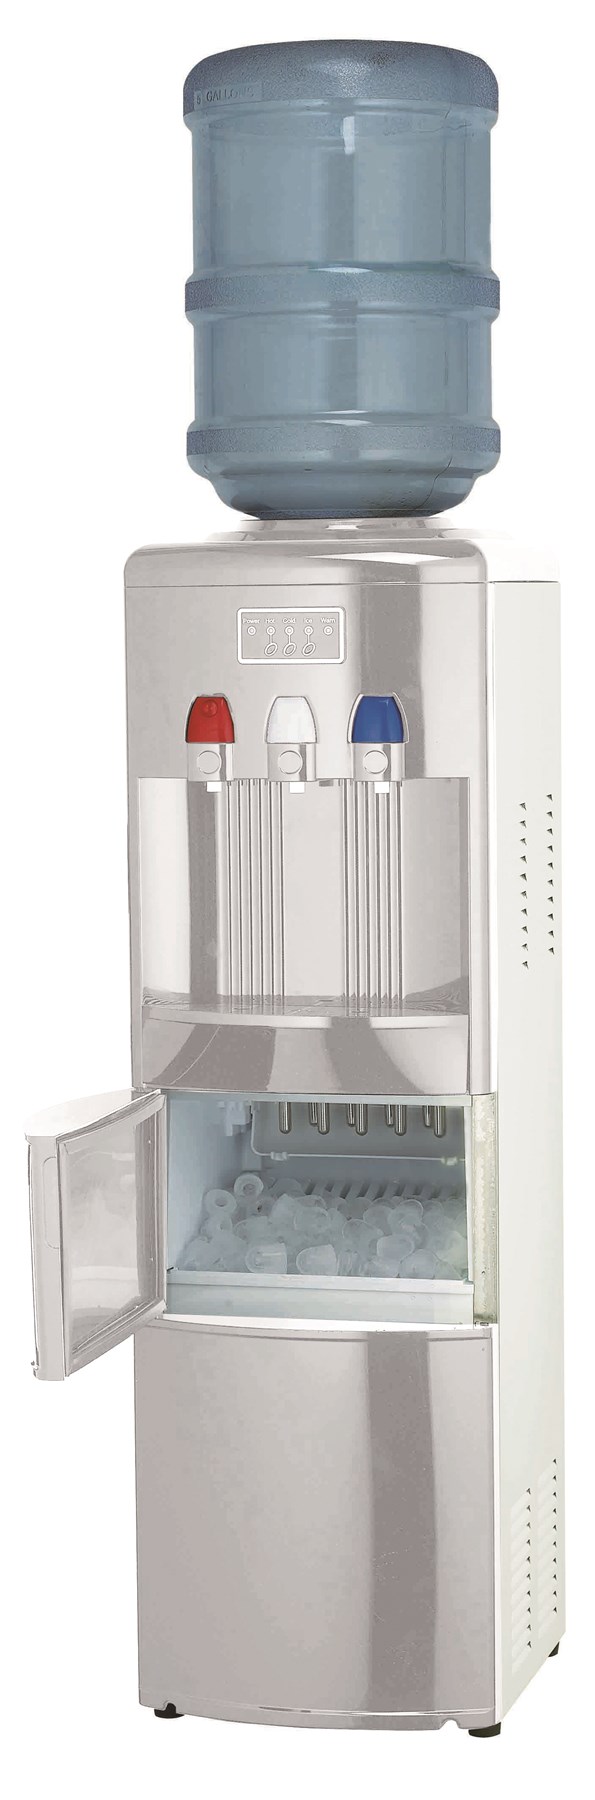 WATER COOLER/DISPENSER WITH ICE MAKER